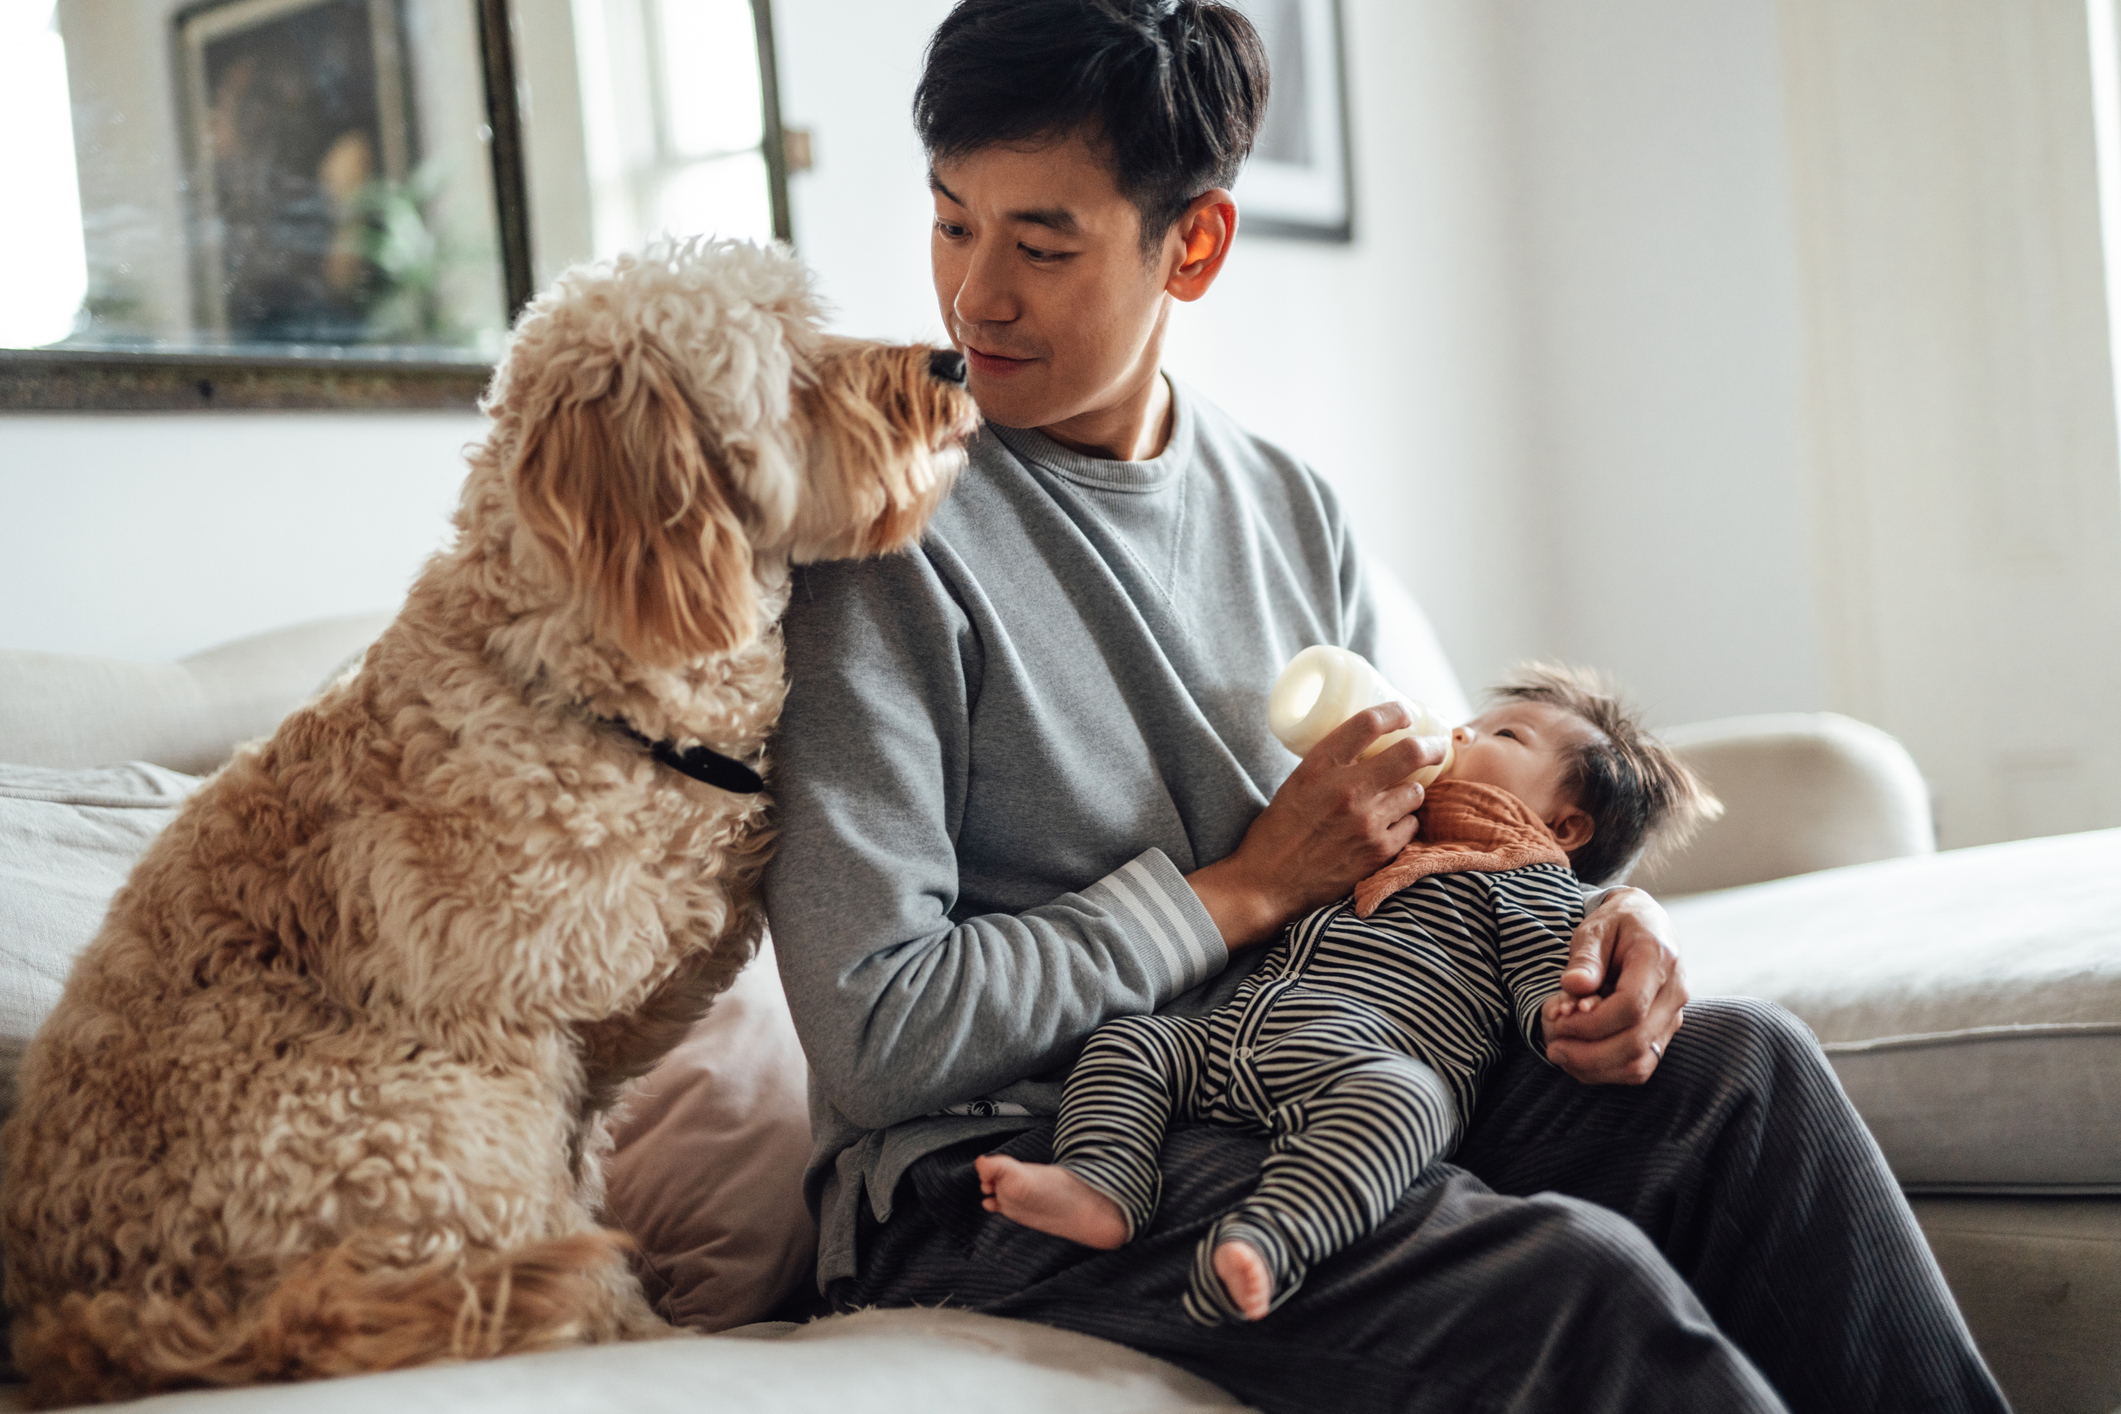 A man feeding his baby while his dog sits close by and watches